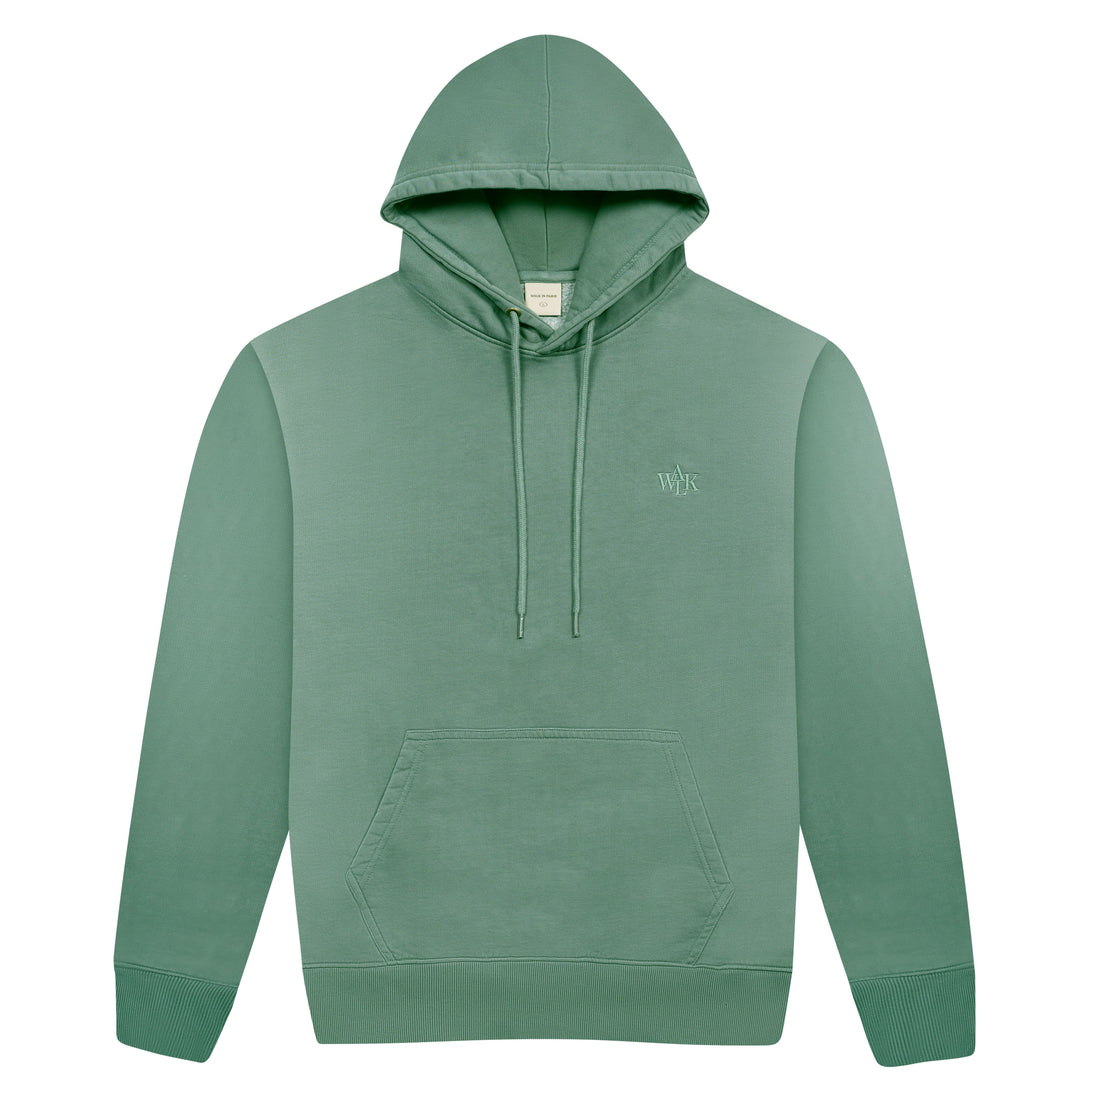 THE FADED GREEN HOODIE